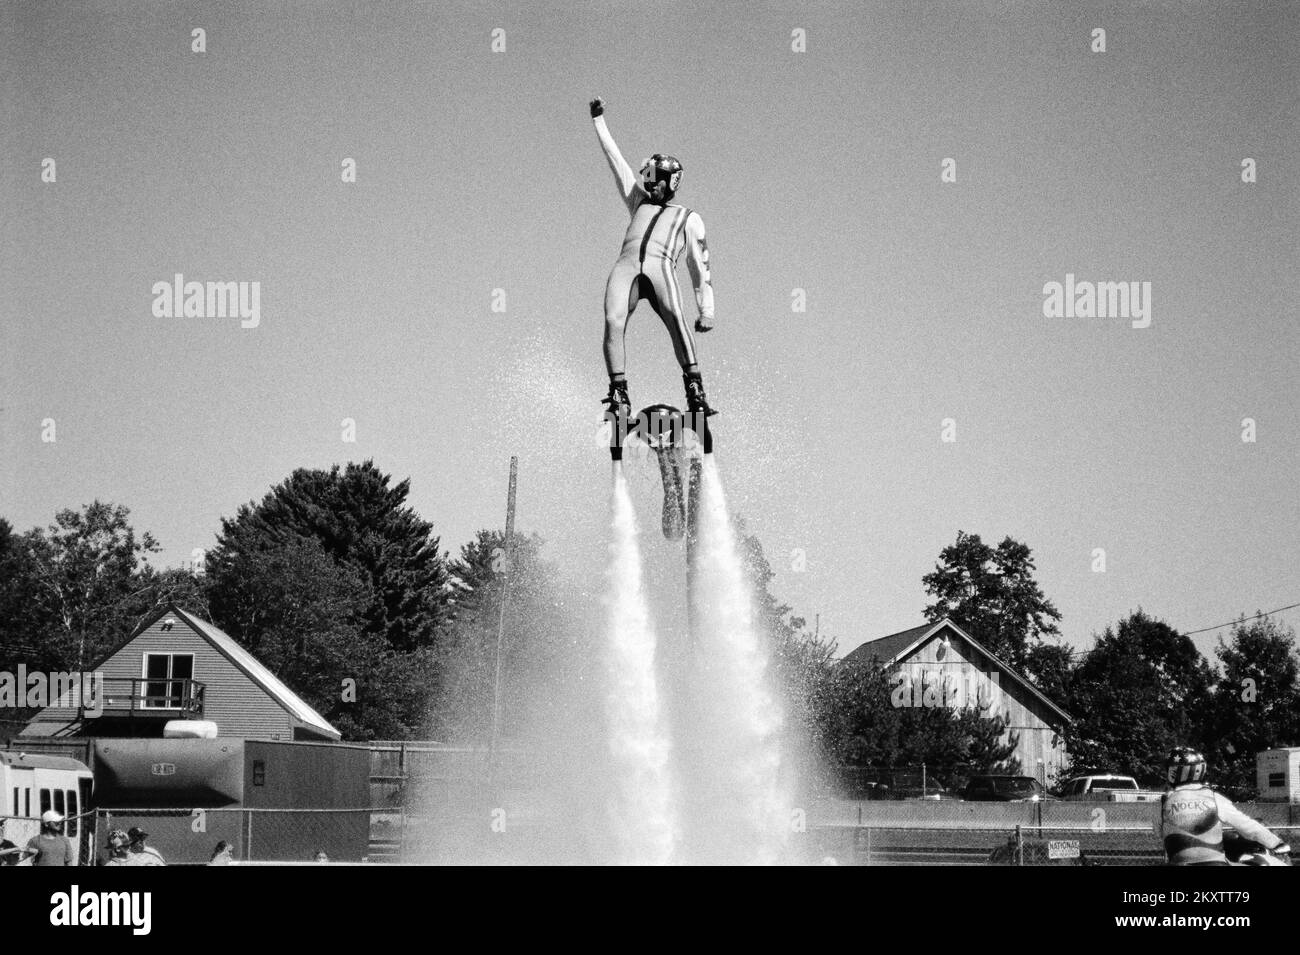 A Performer pilots a Jet Pack in a pool on a sunny day at the Hopkinton Fair. Hopkinton New Hampshire. The image was captured on analog black and whit Stock Photo